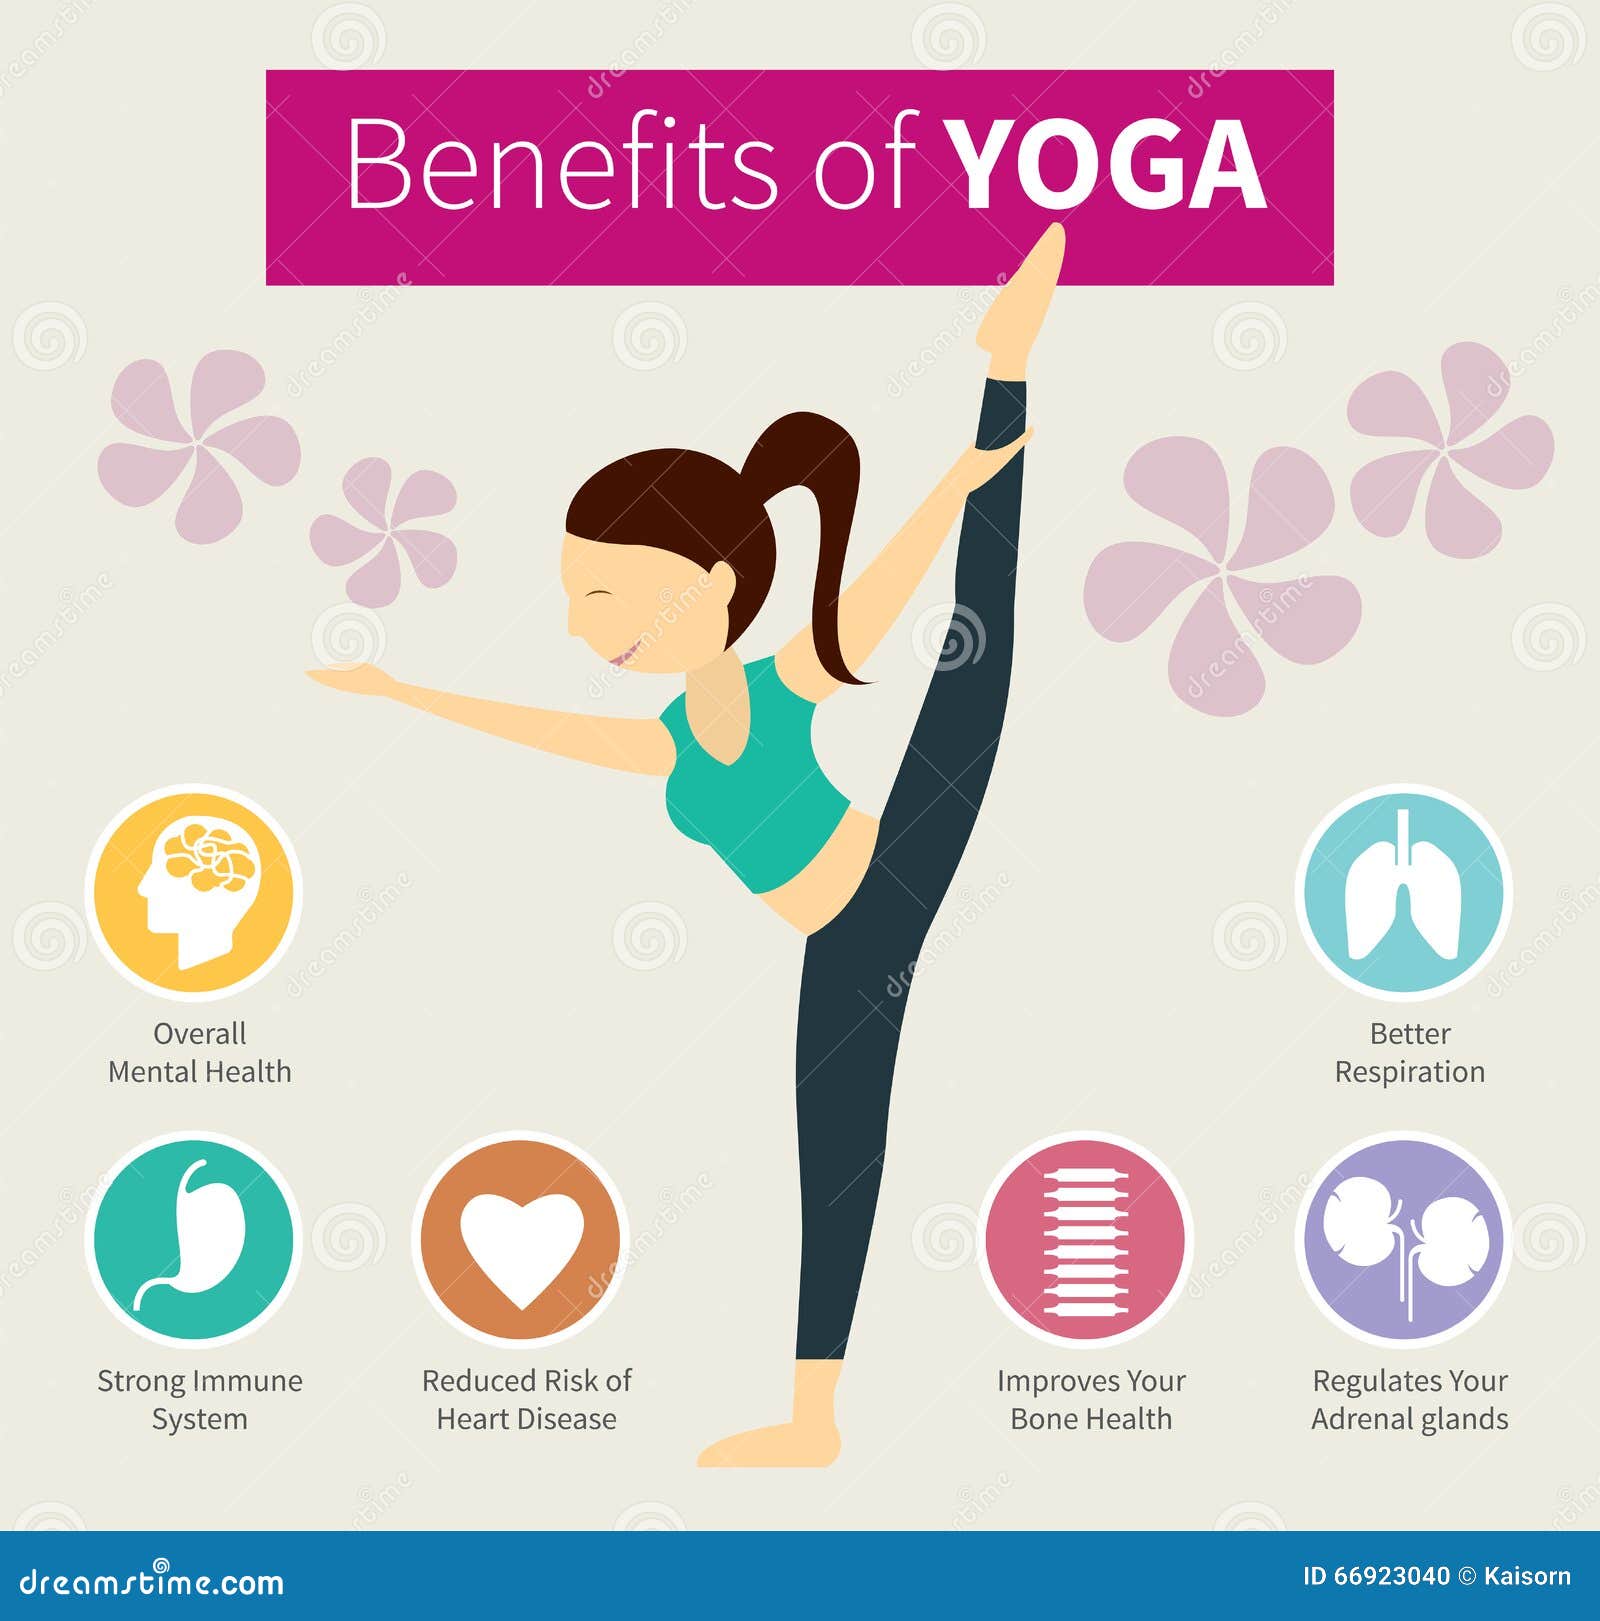 Yoga for beginners: the benefits of yoga and how to do yoga